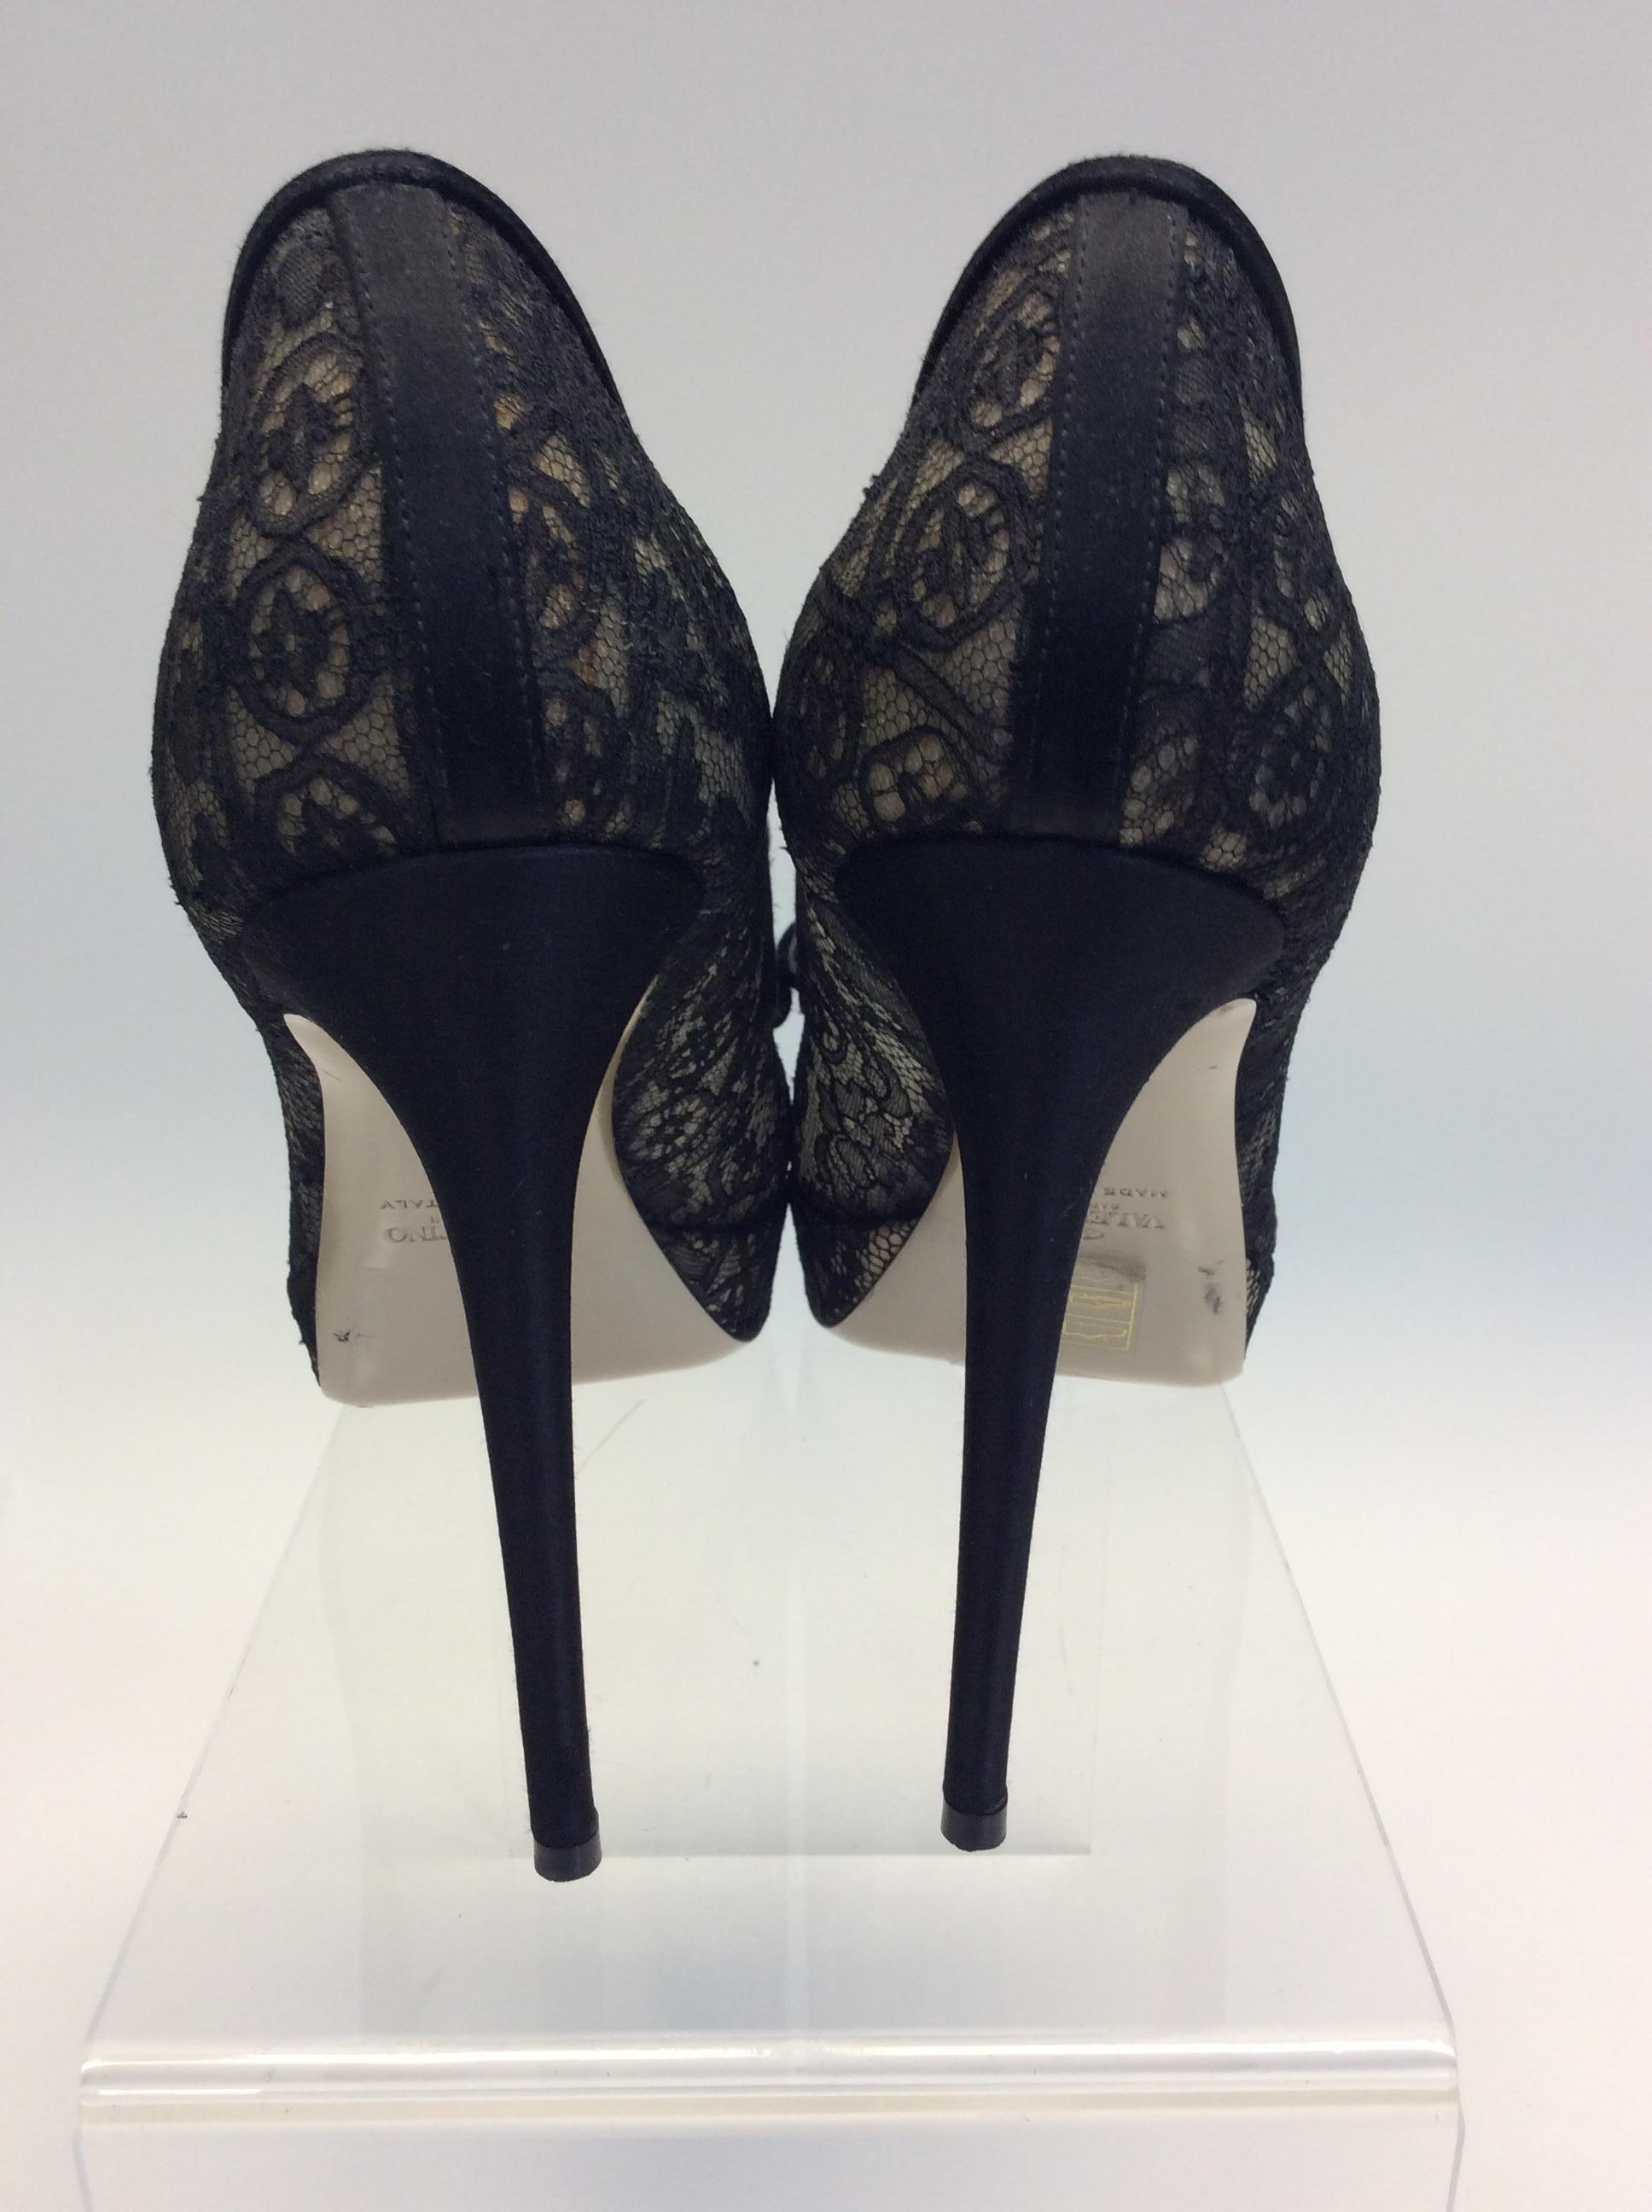 Valentino Black Lace Bow Heels In Excellent Condition For Sale In Narberth, PA